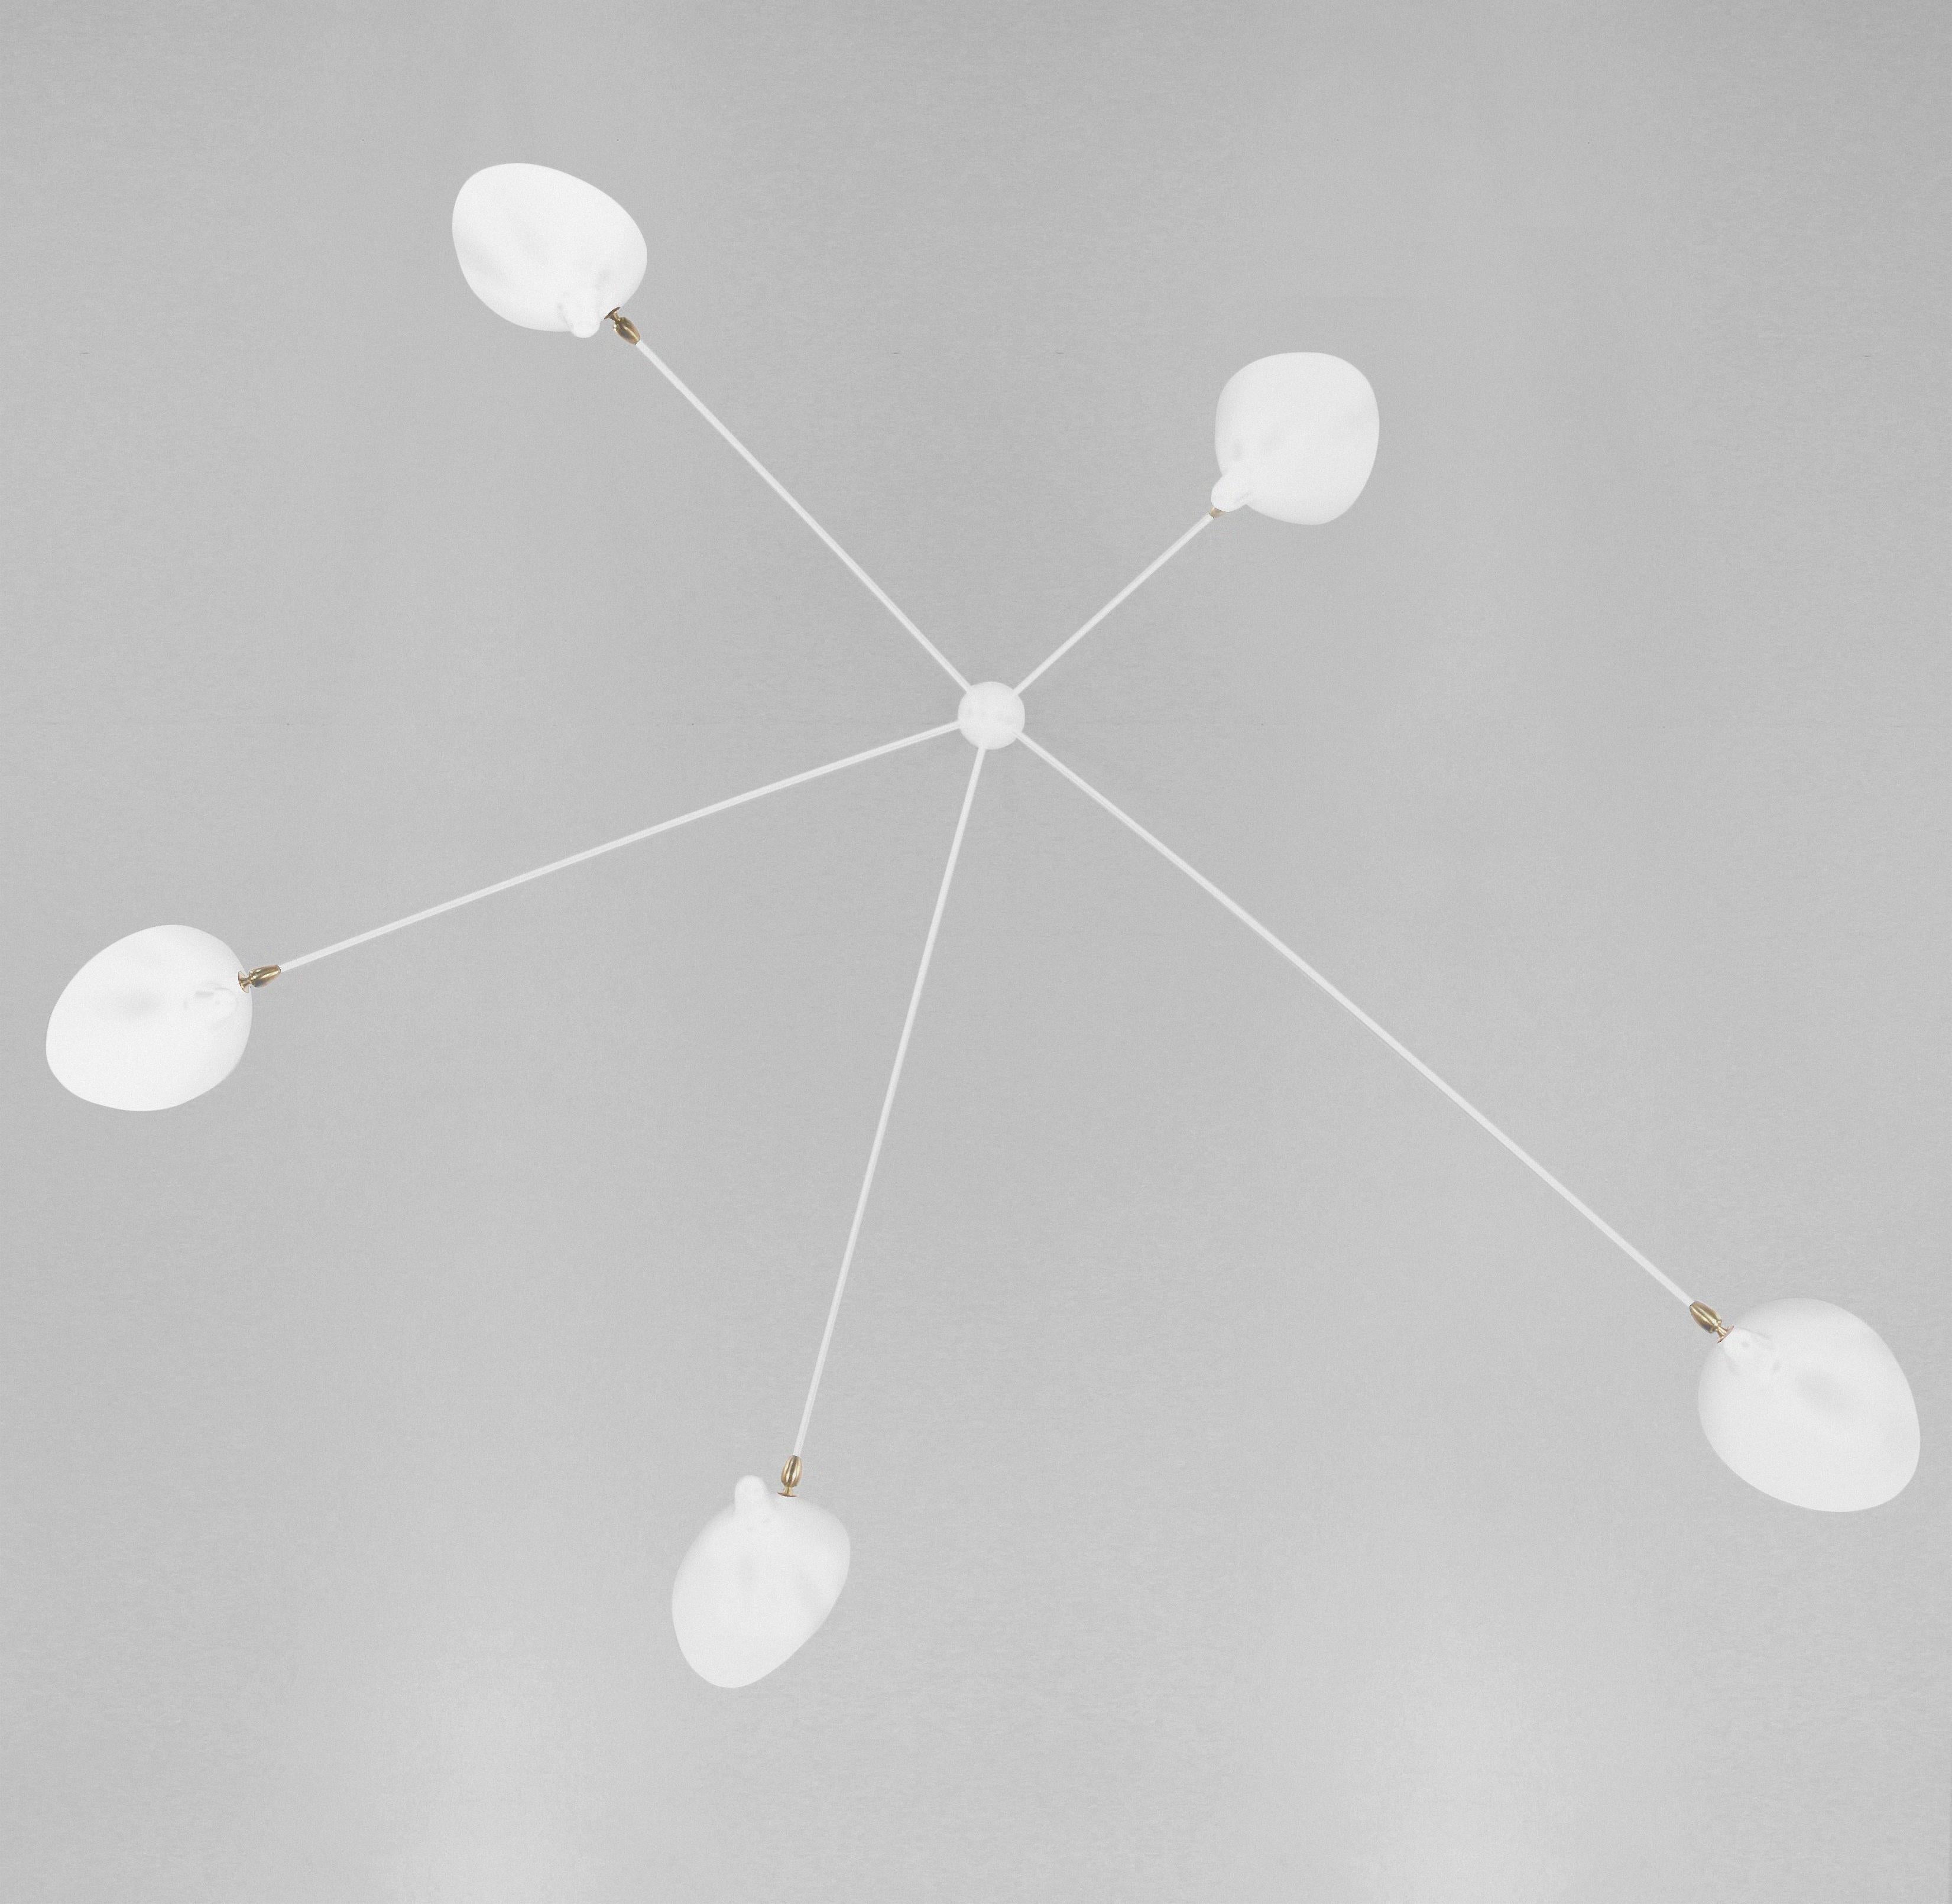 French Serge Mouille Mid-Century Modern White Five Fixed Arms Spider Ceiling Wall Lamp For Sale